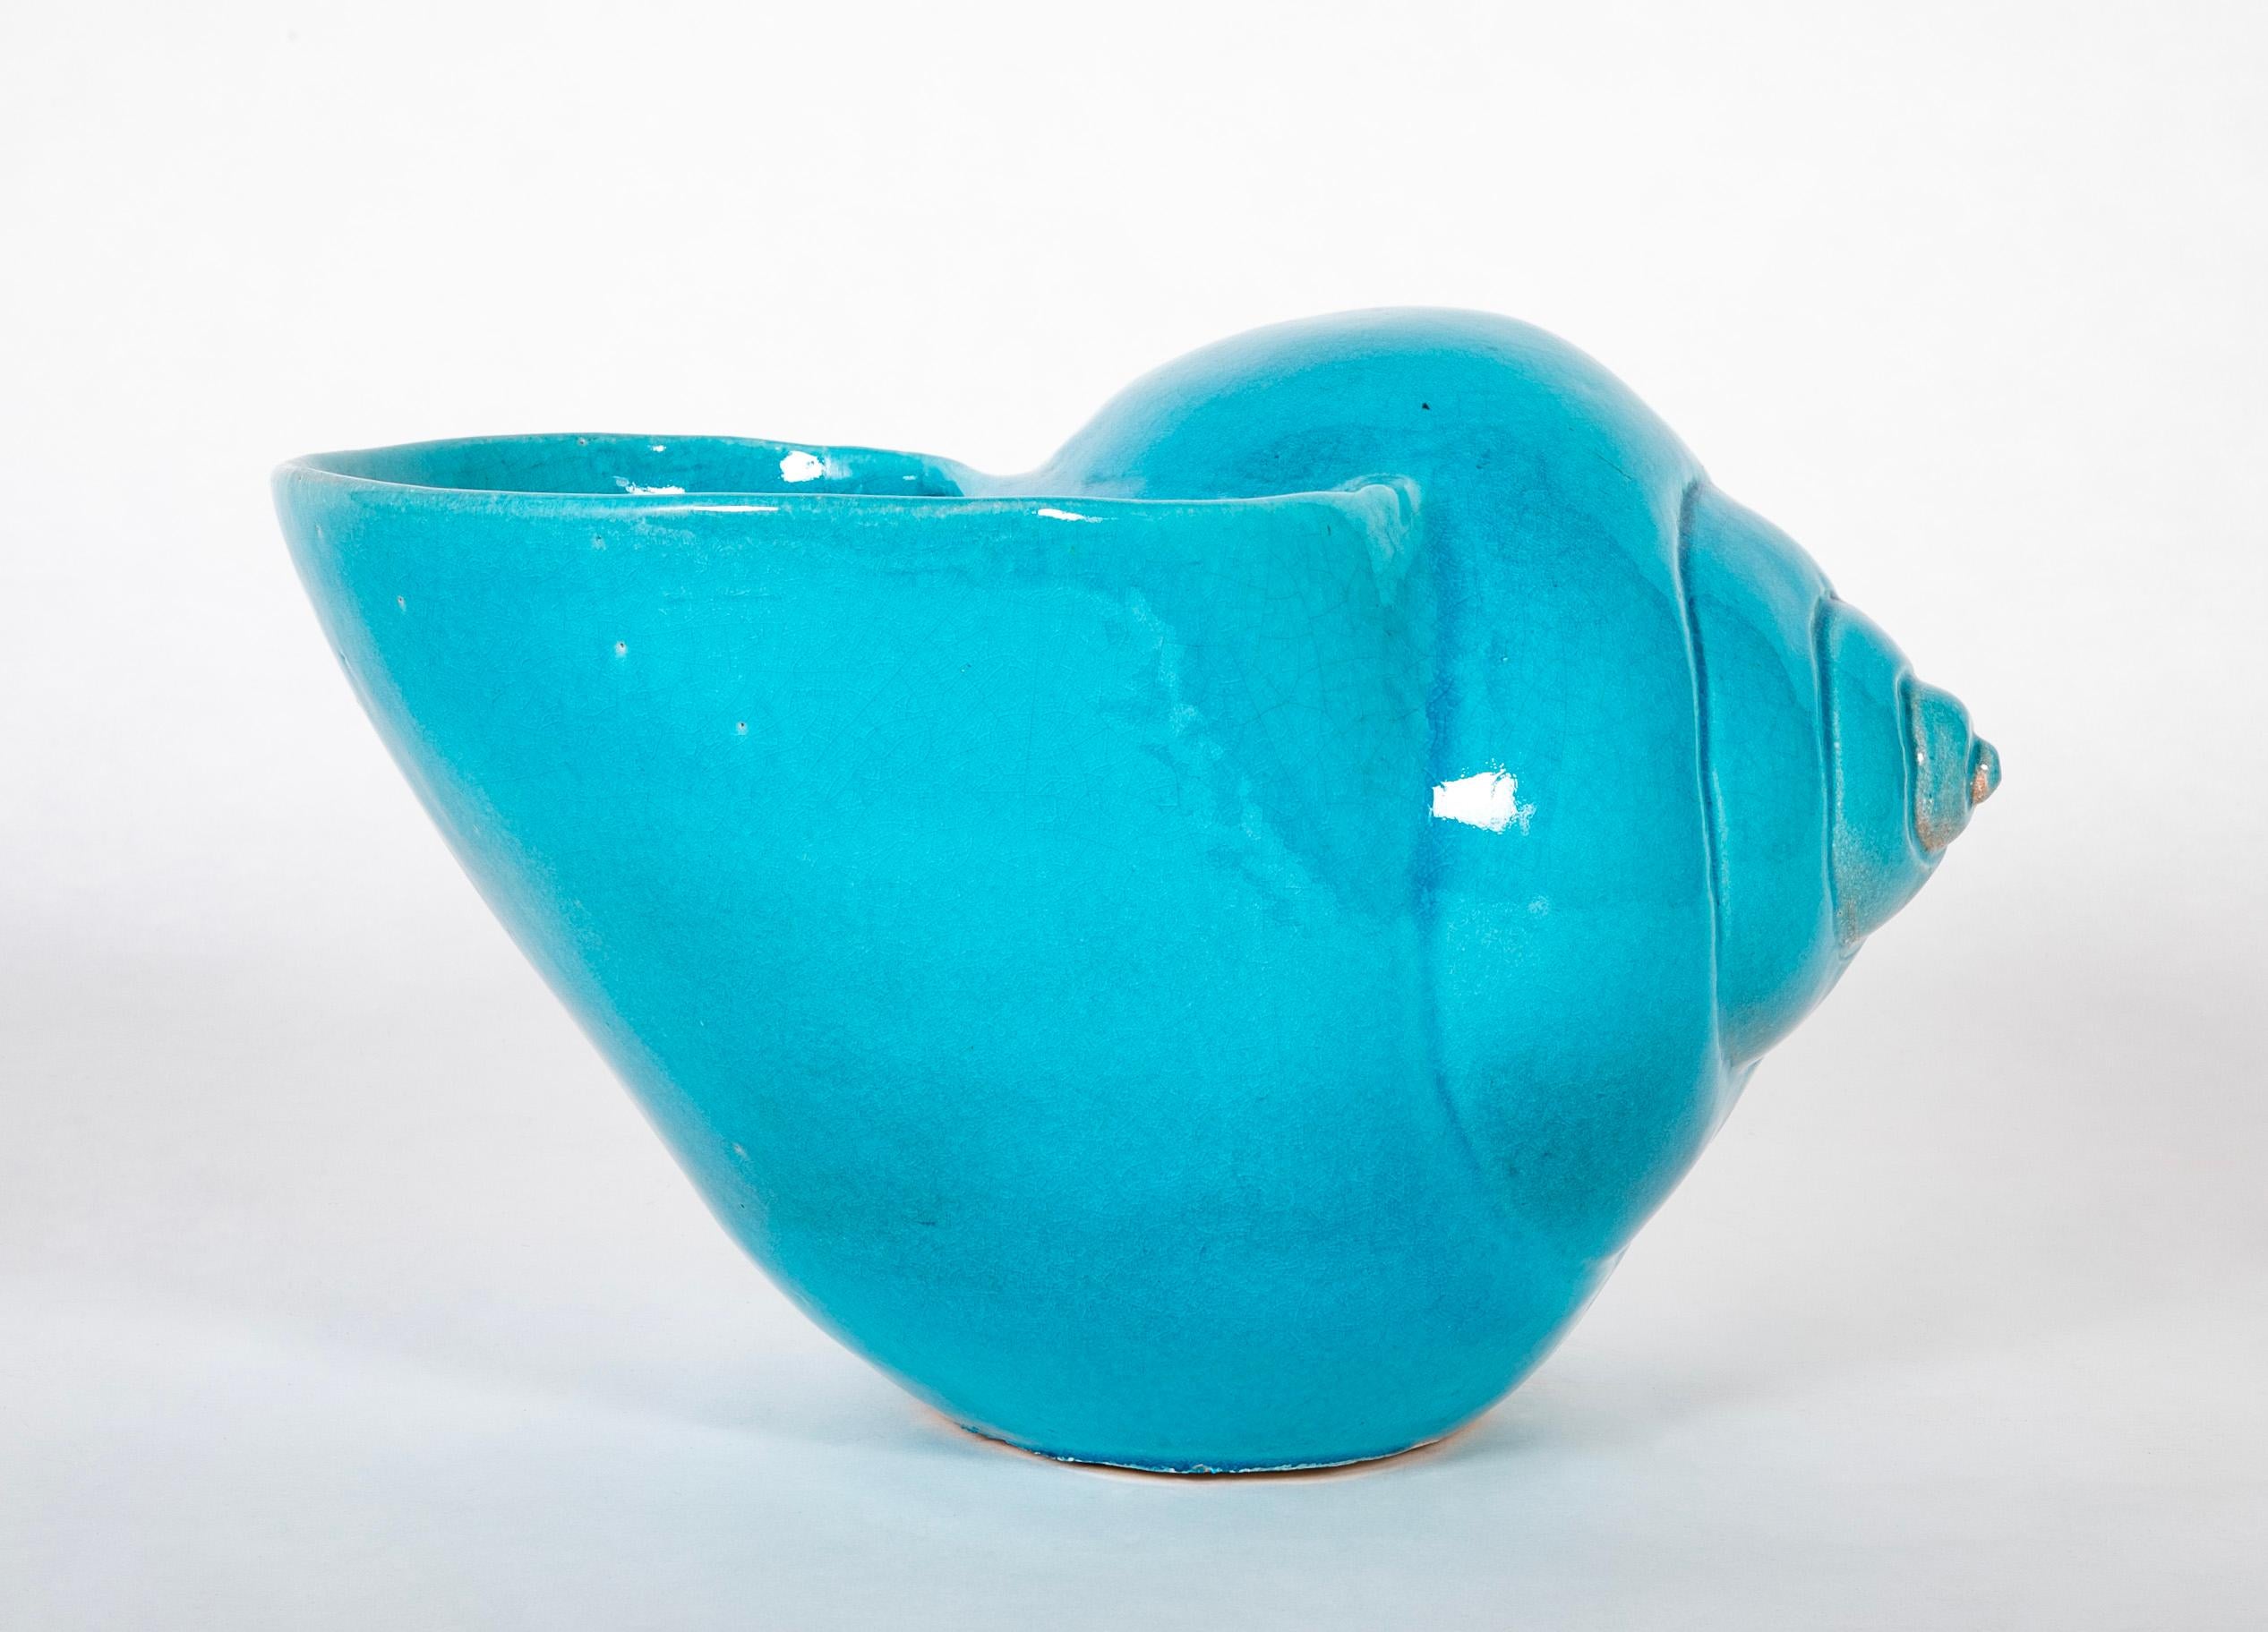 Turquoise Blue Glazed Sea Shell Vase Jardiniere Planter, Large Scale For Sale 11